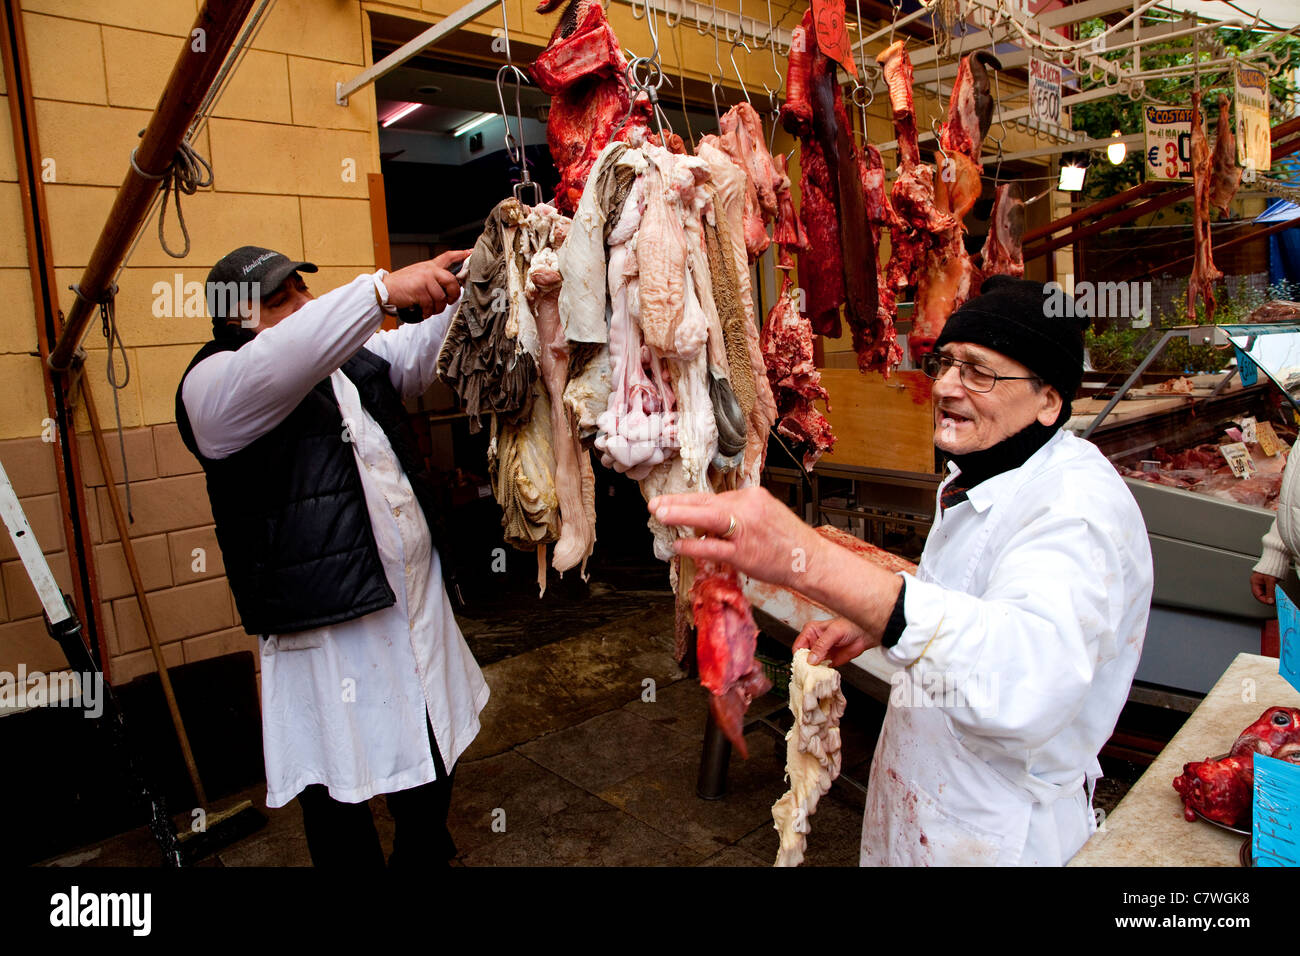 Butcher's shop selling raw meat and guts at Ballarò, traditional old market in Palermo, Sicily, Sicilia, Italy Stock Photo